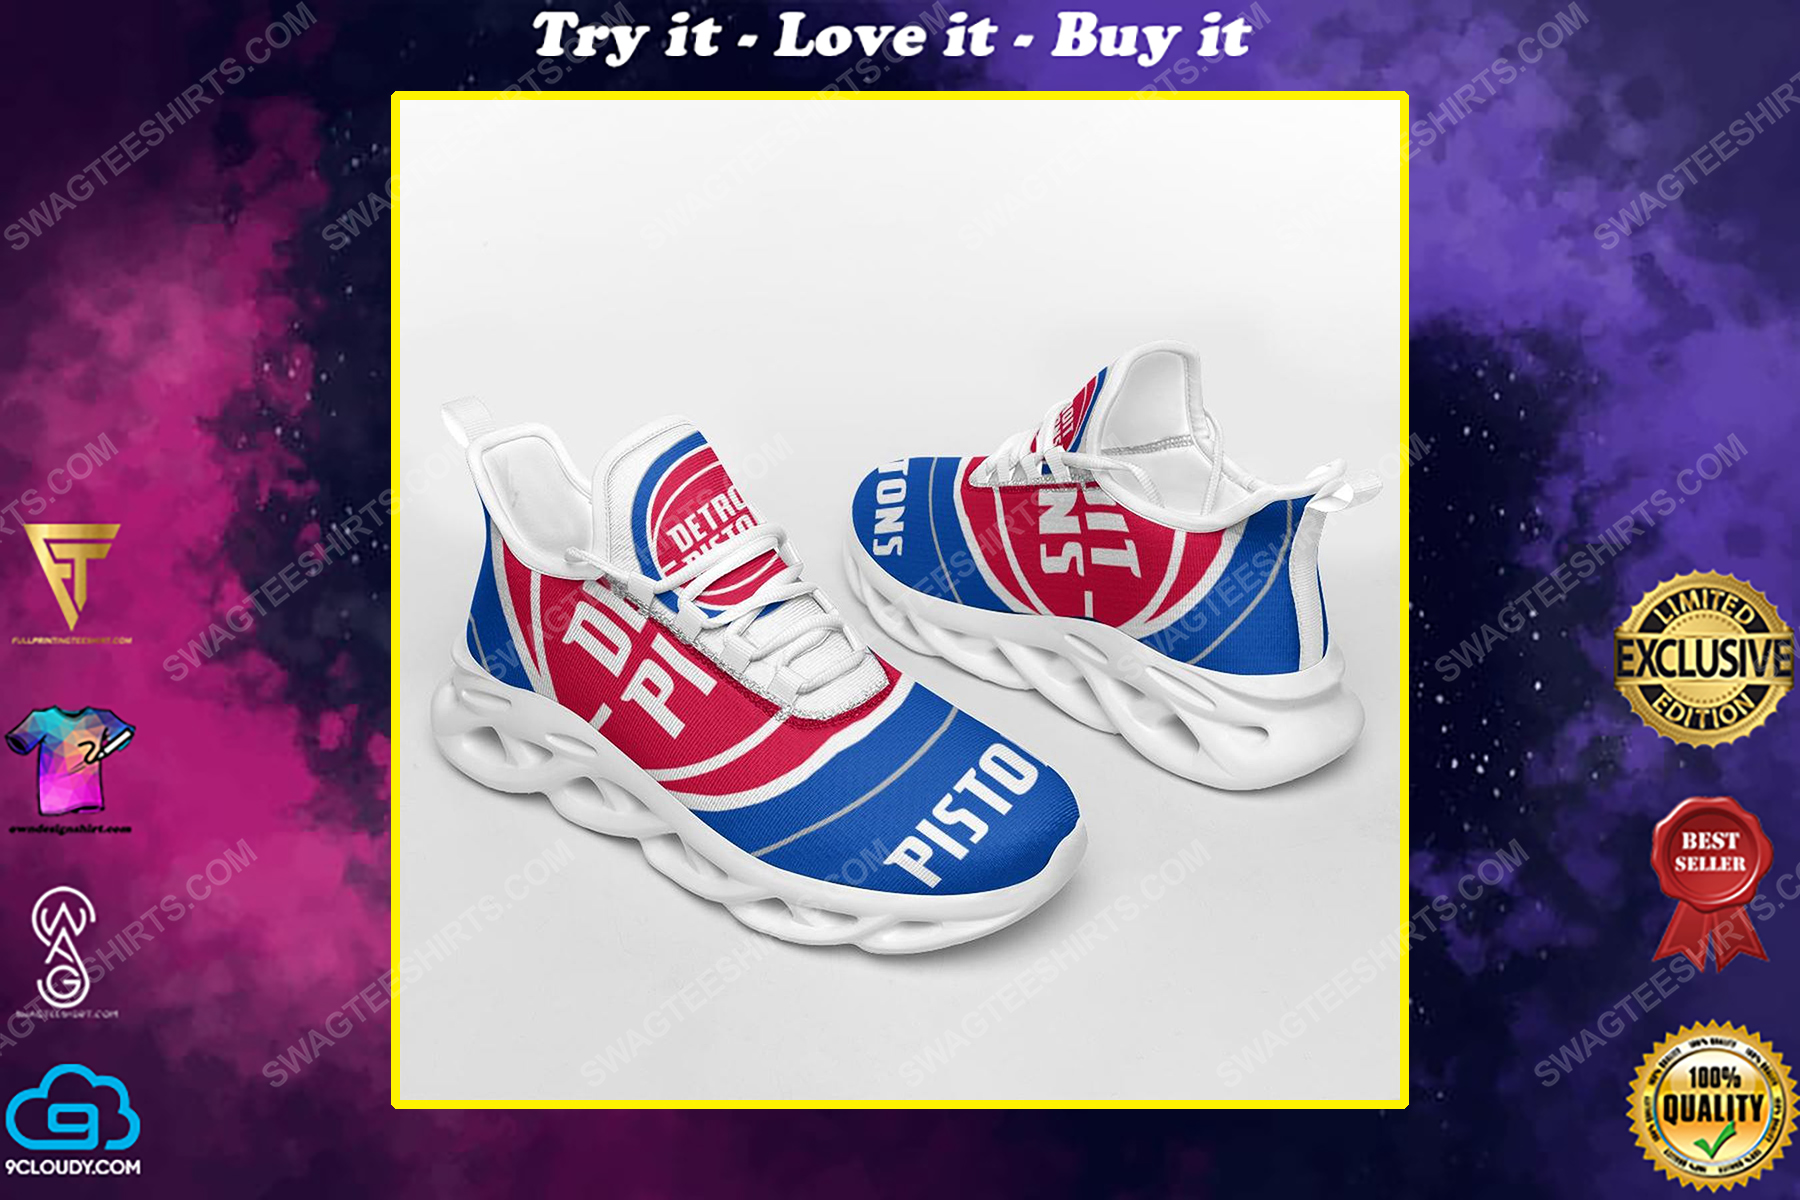 The detroit pistons basketball team max soul shoes